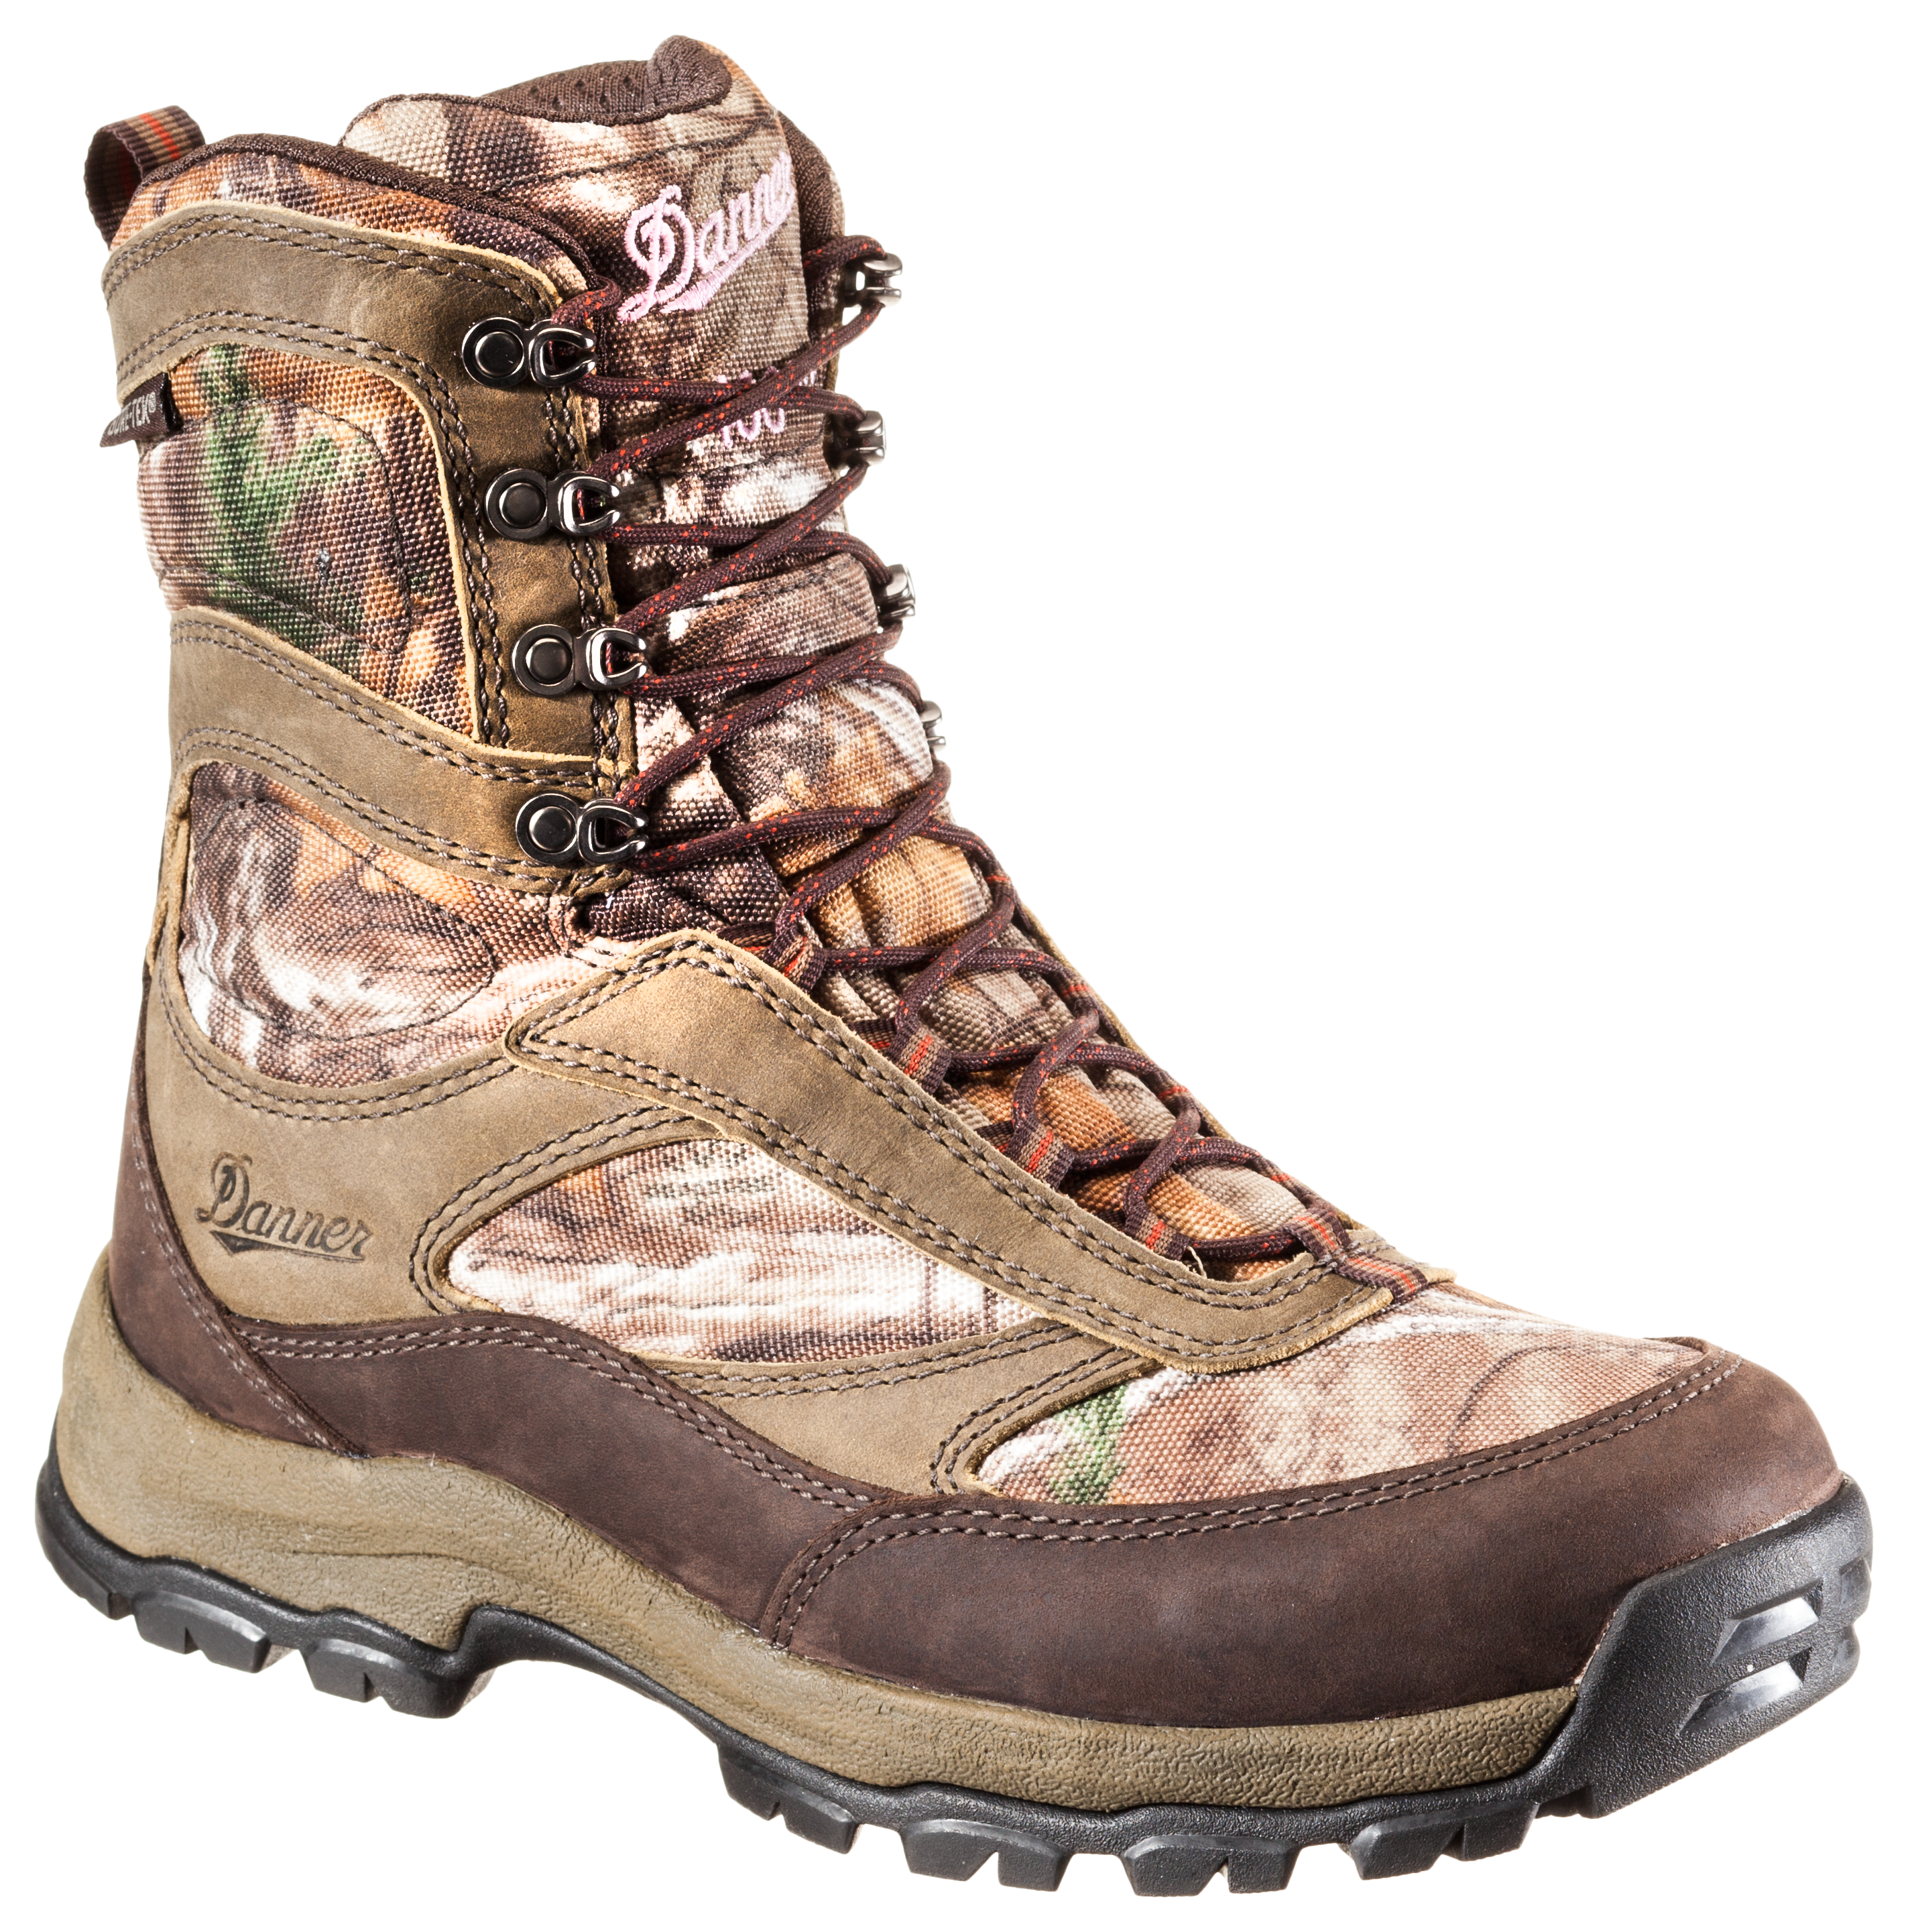 Danner High Ground GORE-TEX Insulated Hunting Boots for Ladies | Bass ...